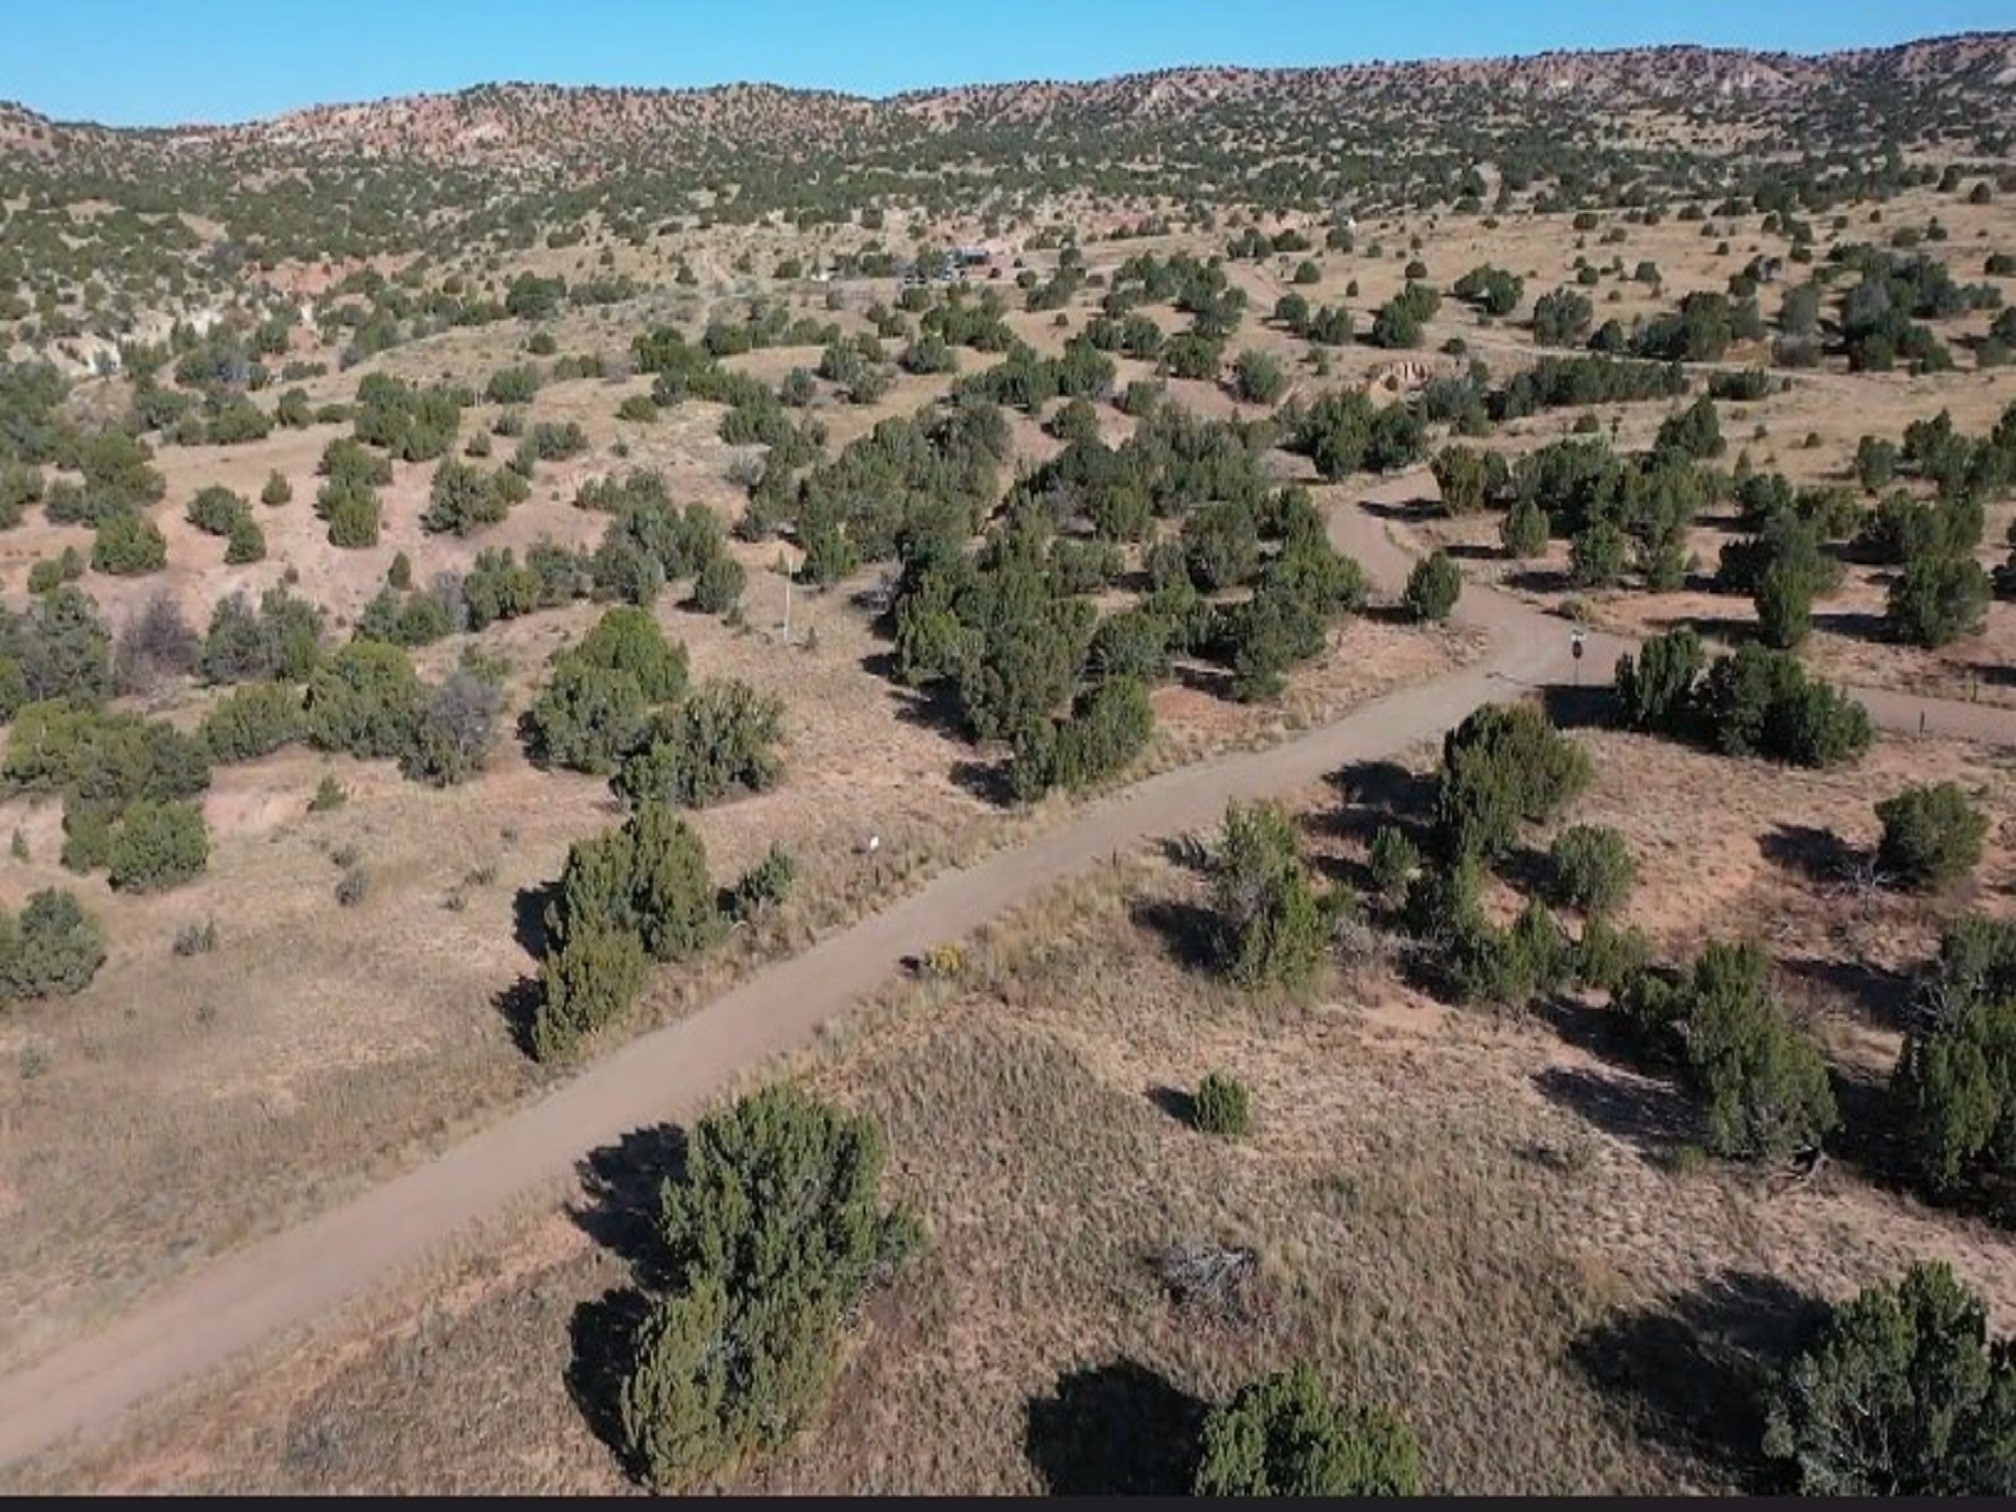 63 Southern Crescent Road Lot 21, Lamy, New Mexico 87540, ,Land,For Sale,63 Southern Crescent Road Lot 21,202233542